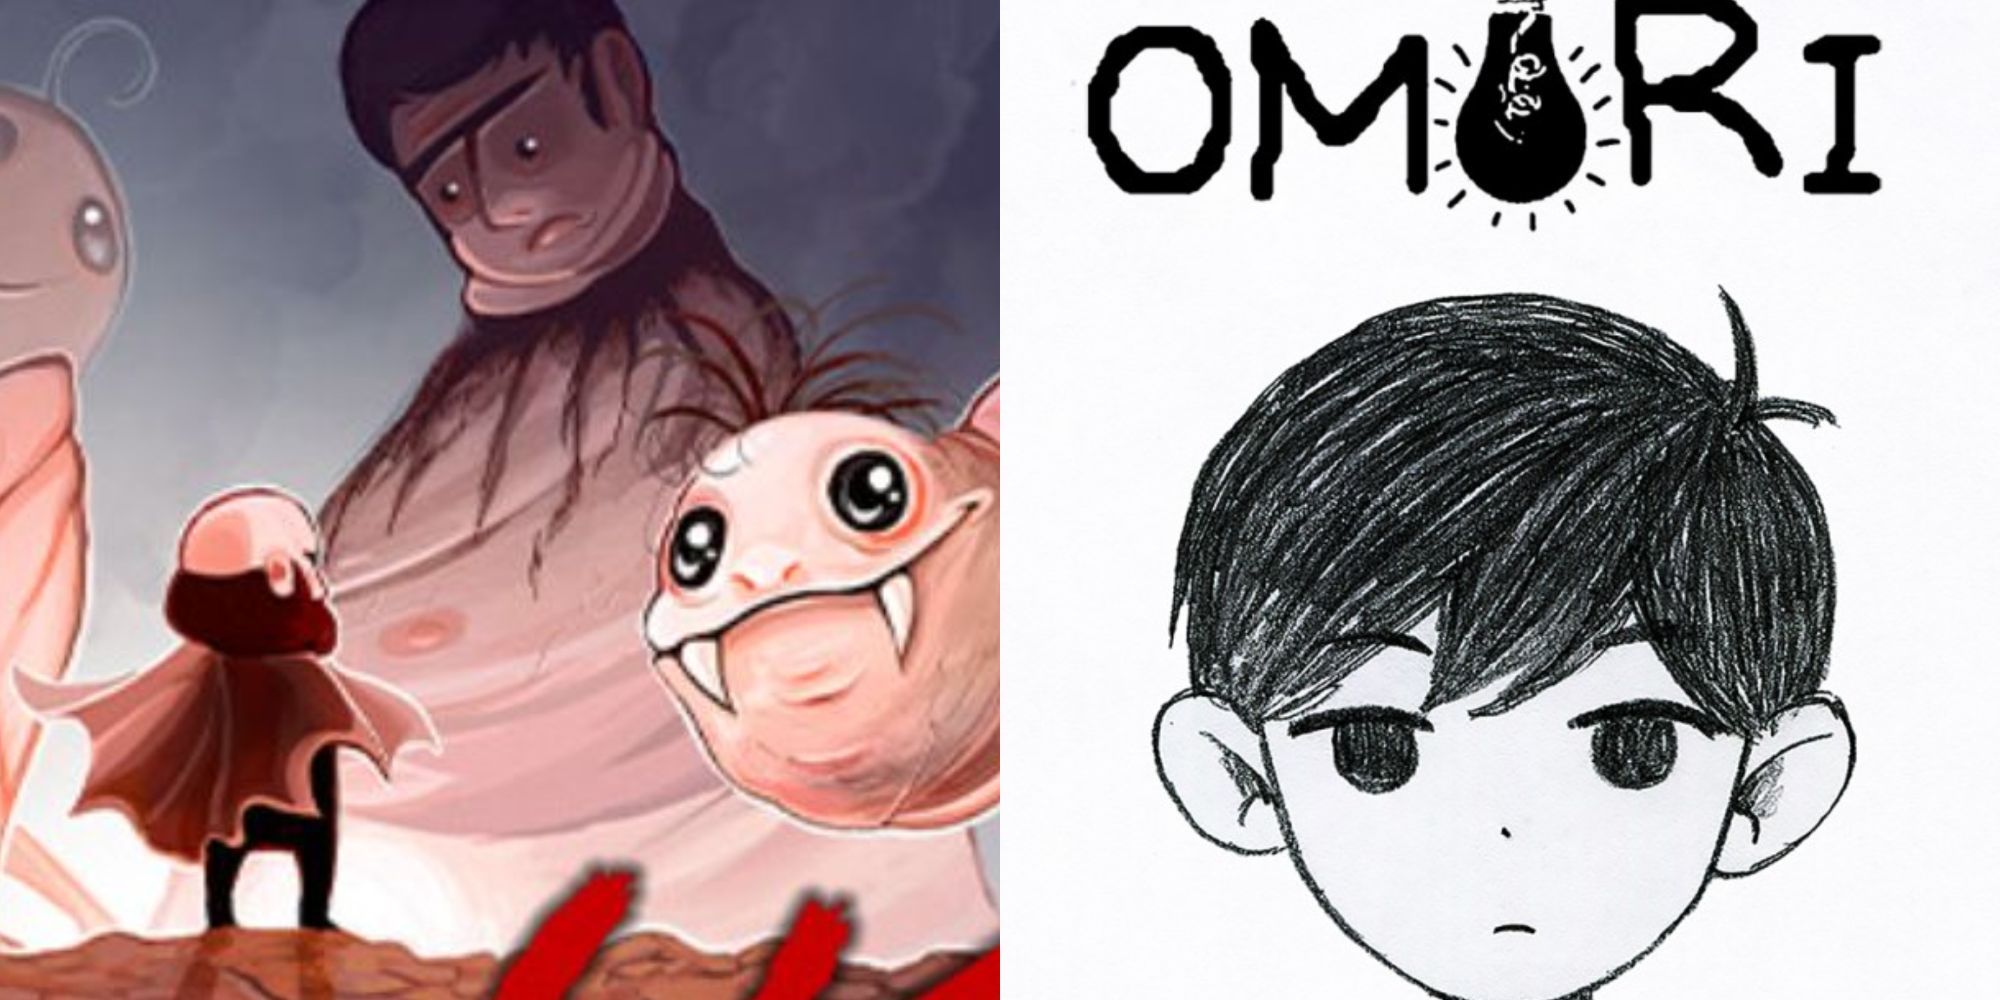 The cover of Lisa: The Painful, which has a small man being overshadowed by frightening mutants, next to the cover of Omori, which is a black and white boy with an sad face